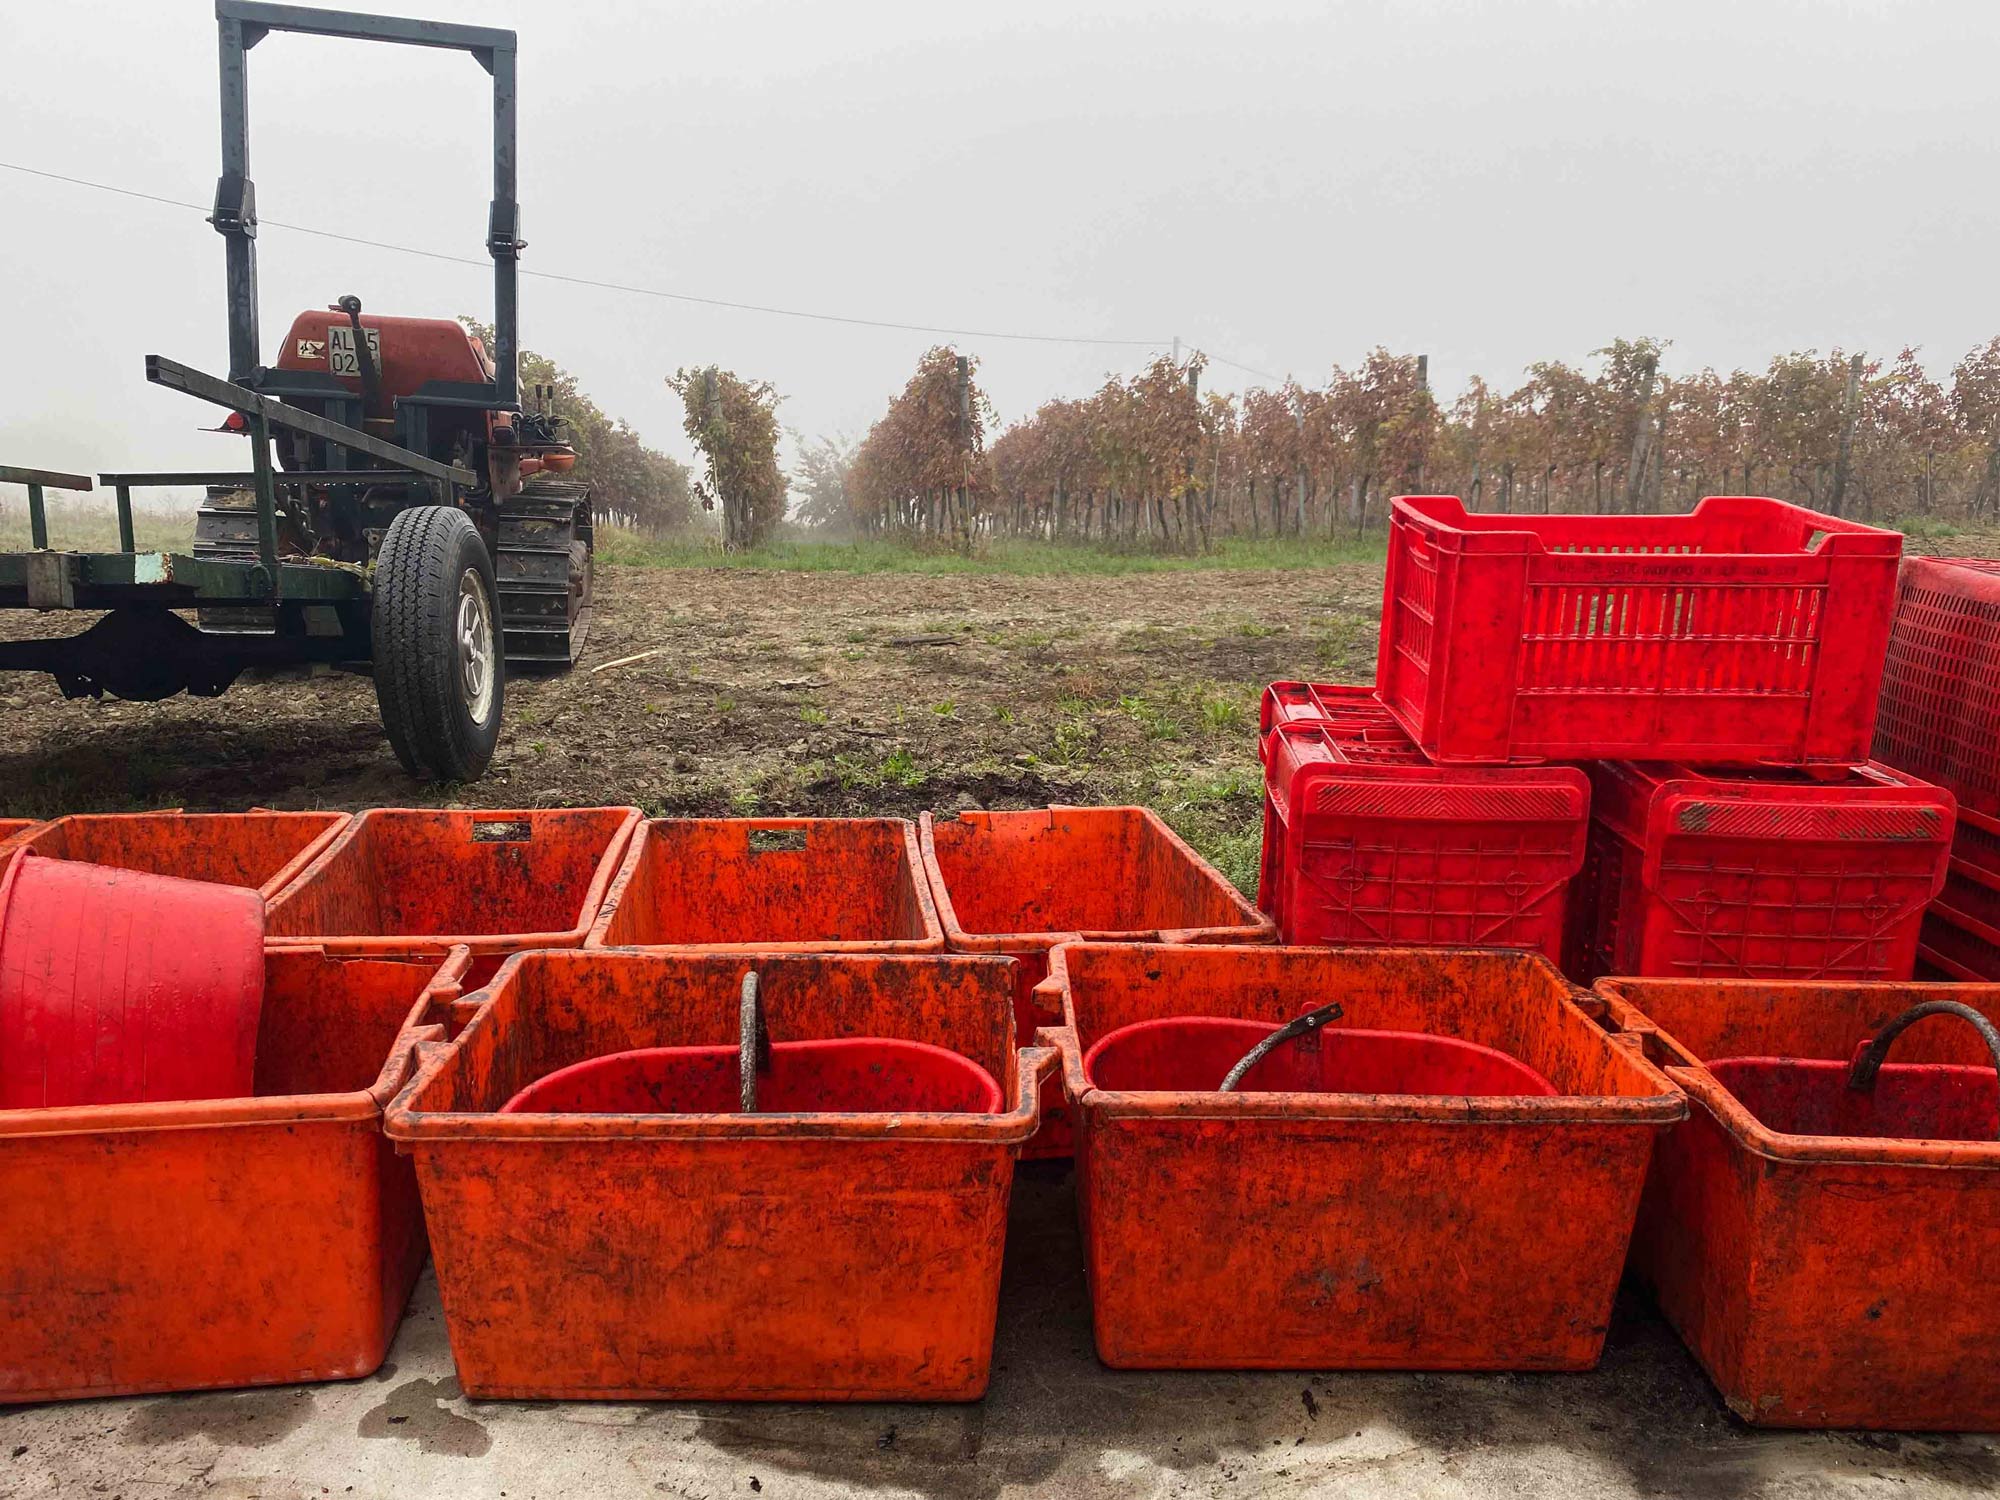 The crates used to gather the grapes during harvest.